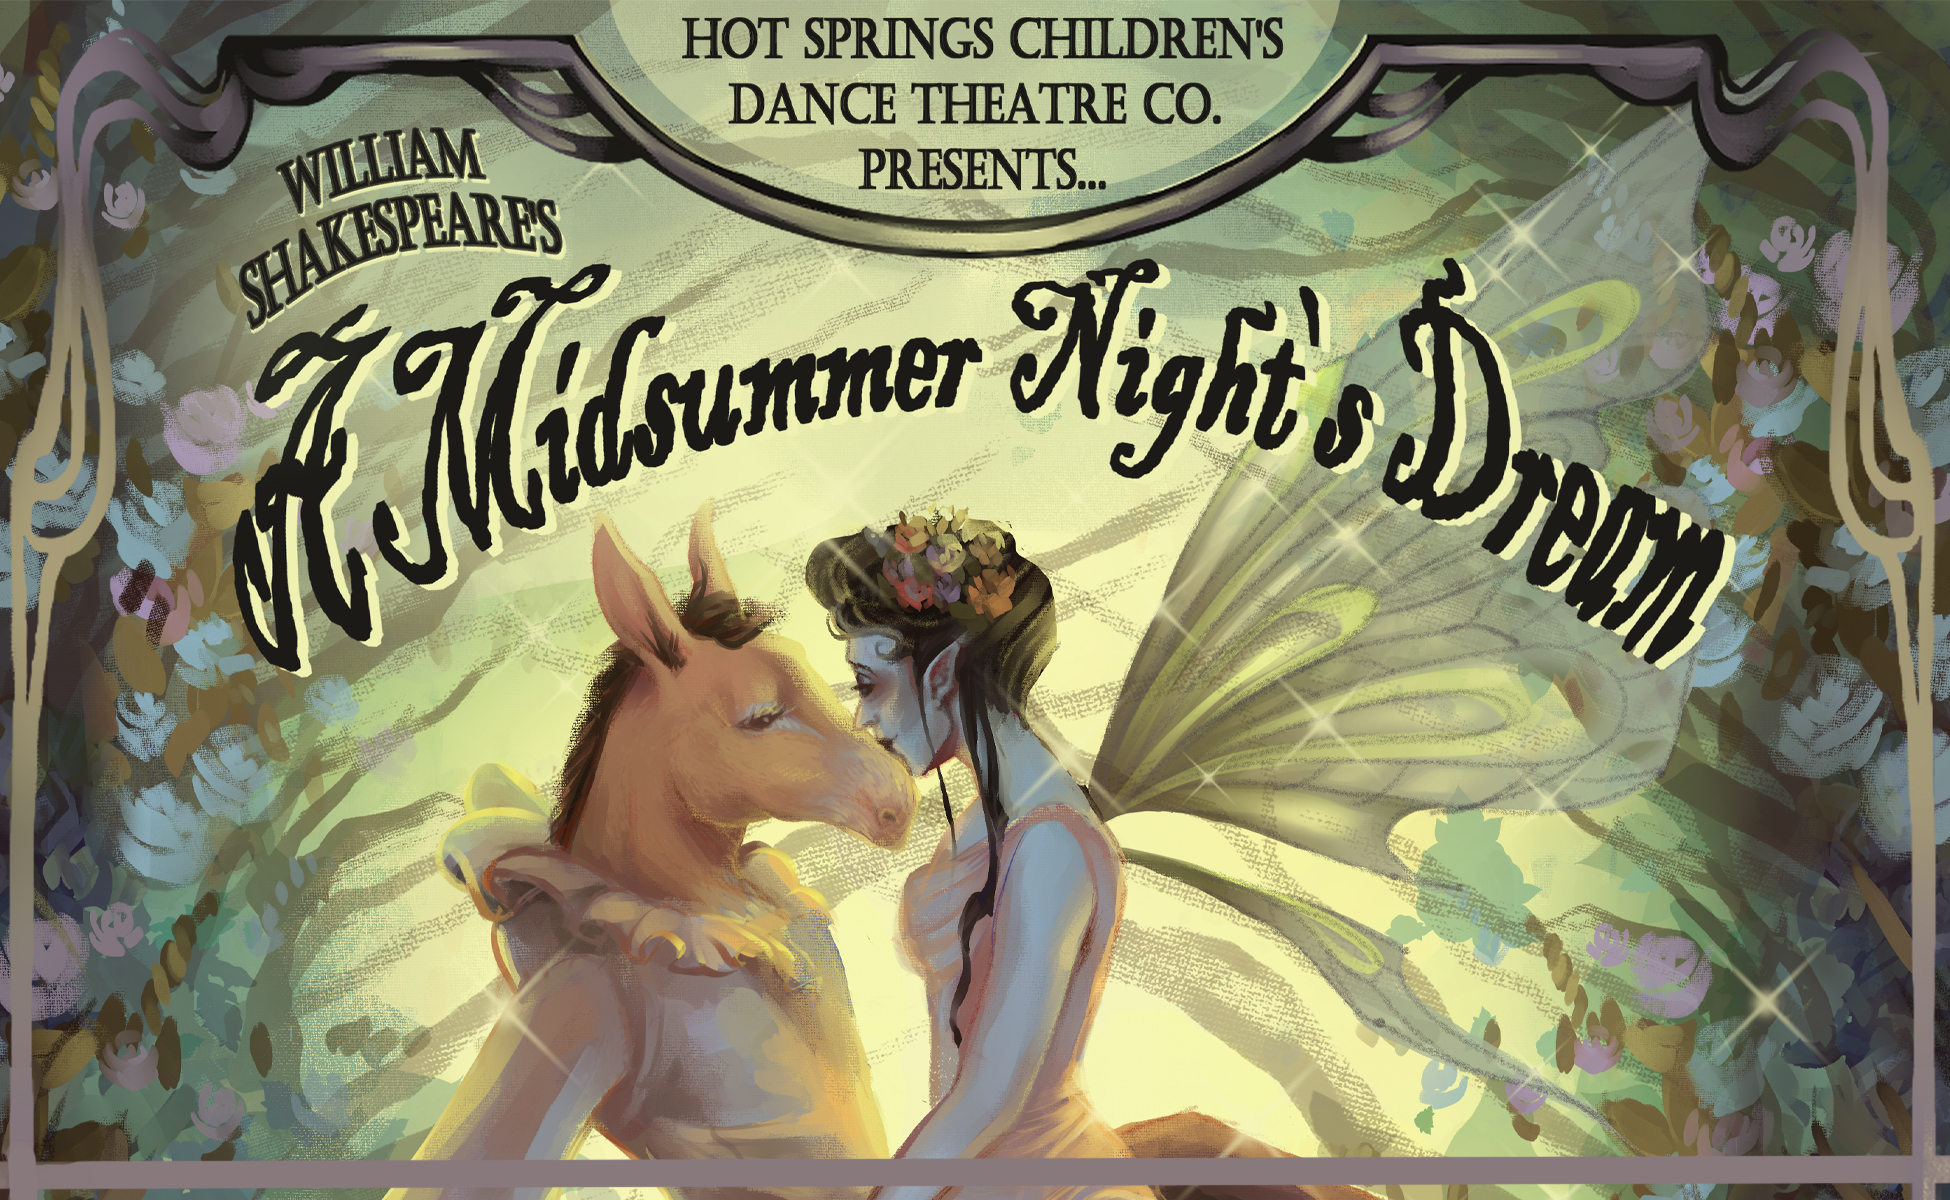 Featured photo for Hot Springs Children's Dance Theatre Company presents "A Midsummer Night's Dream".